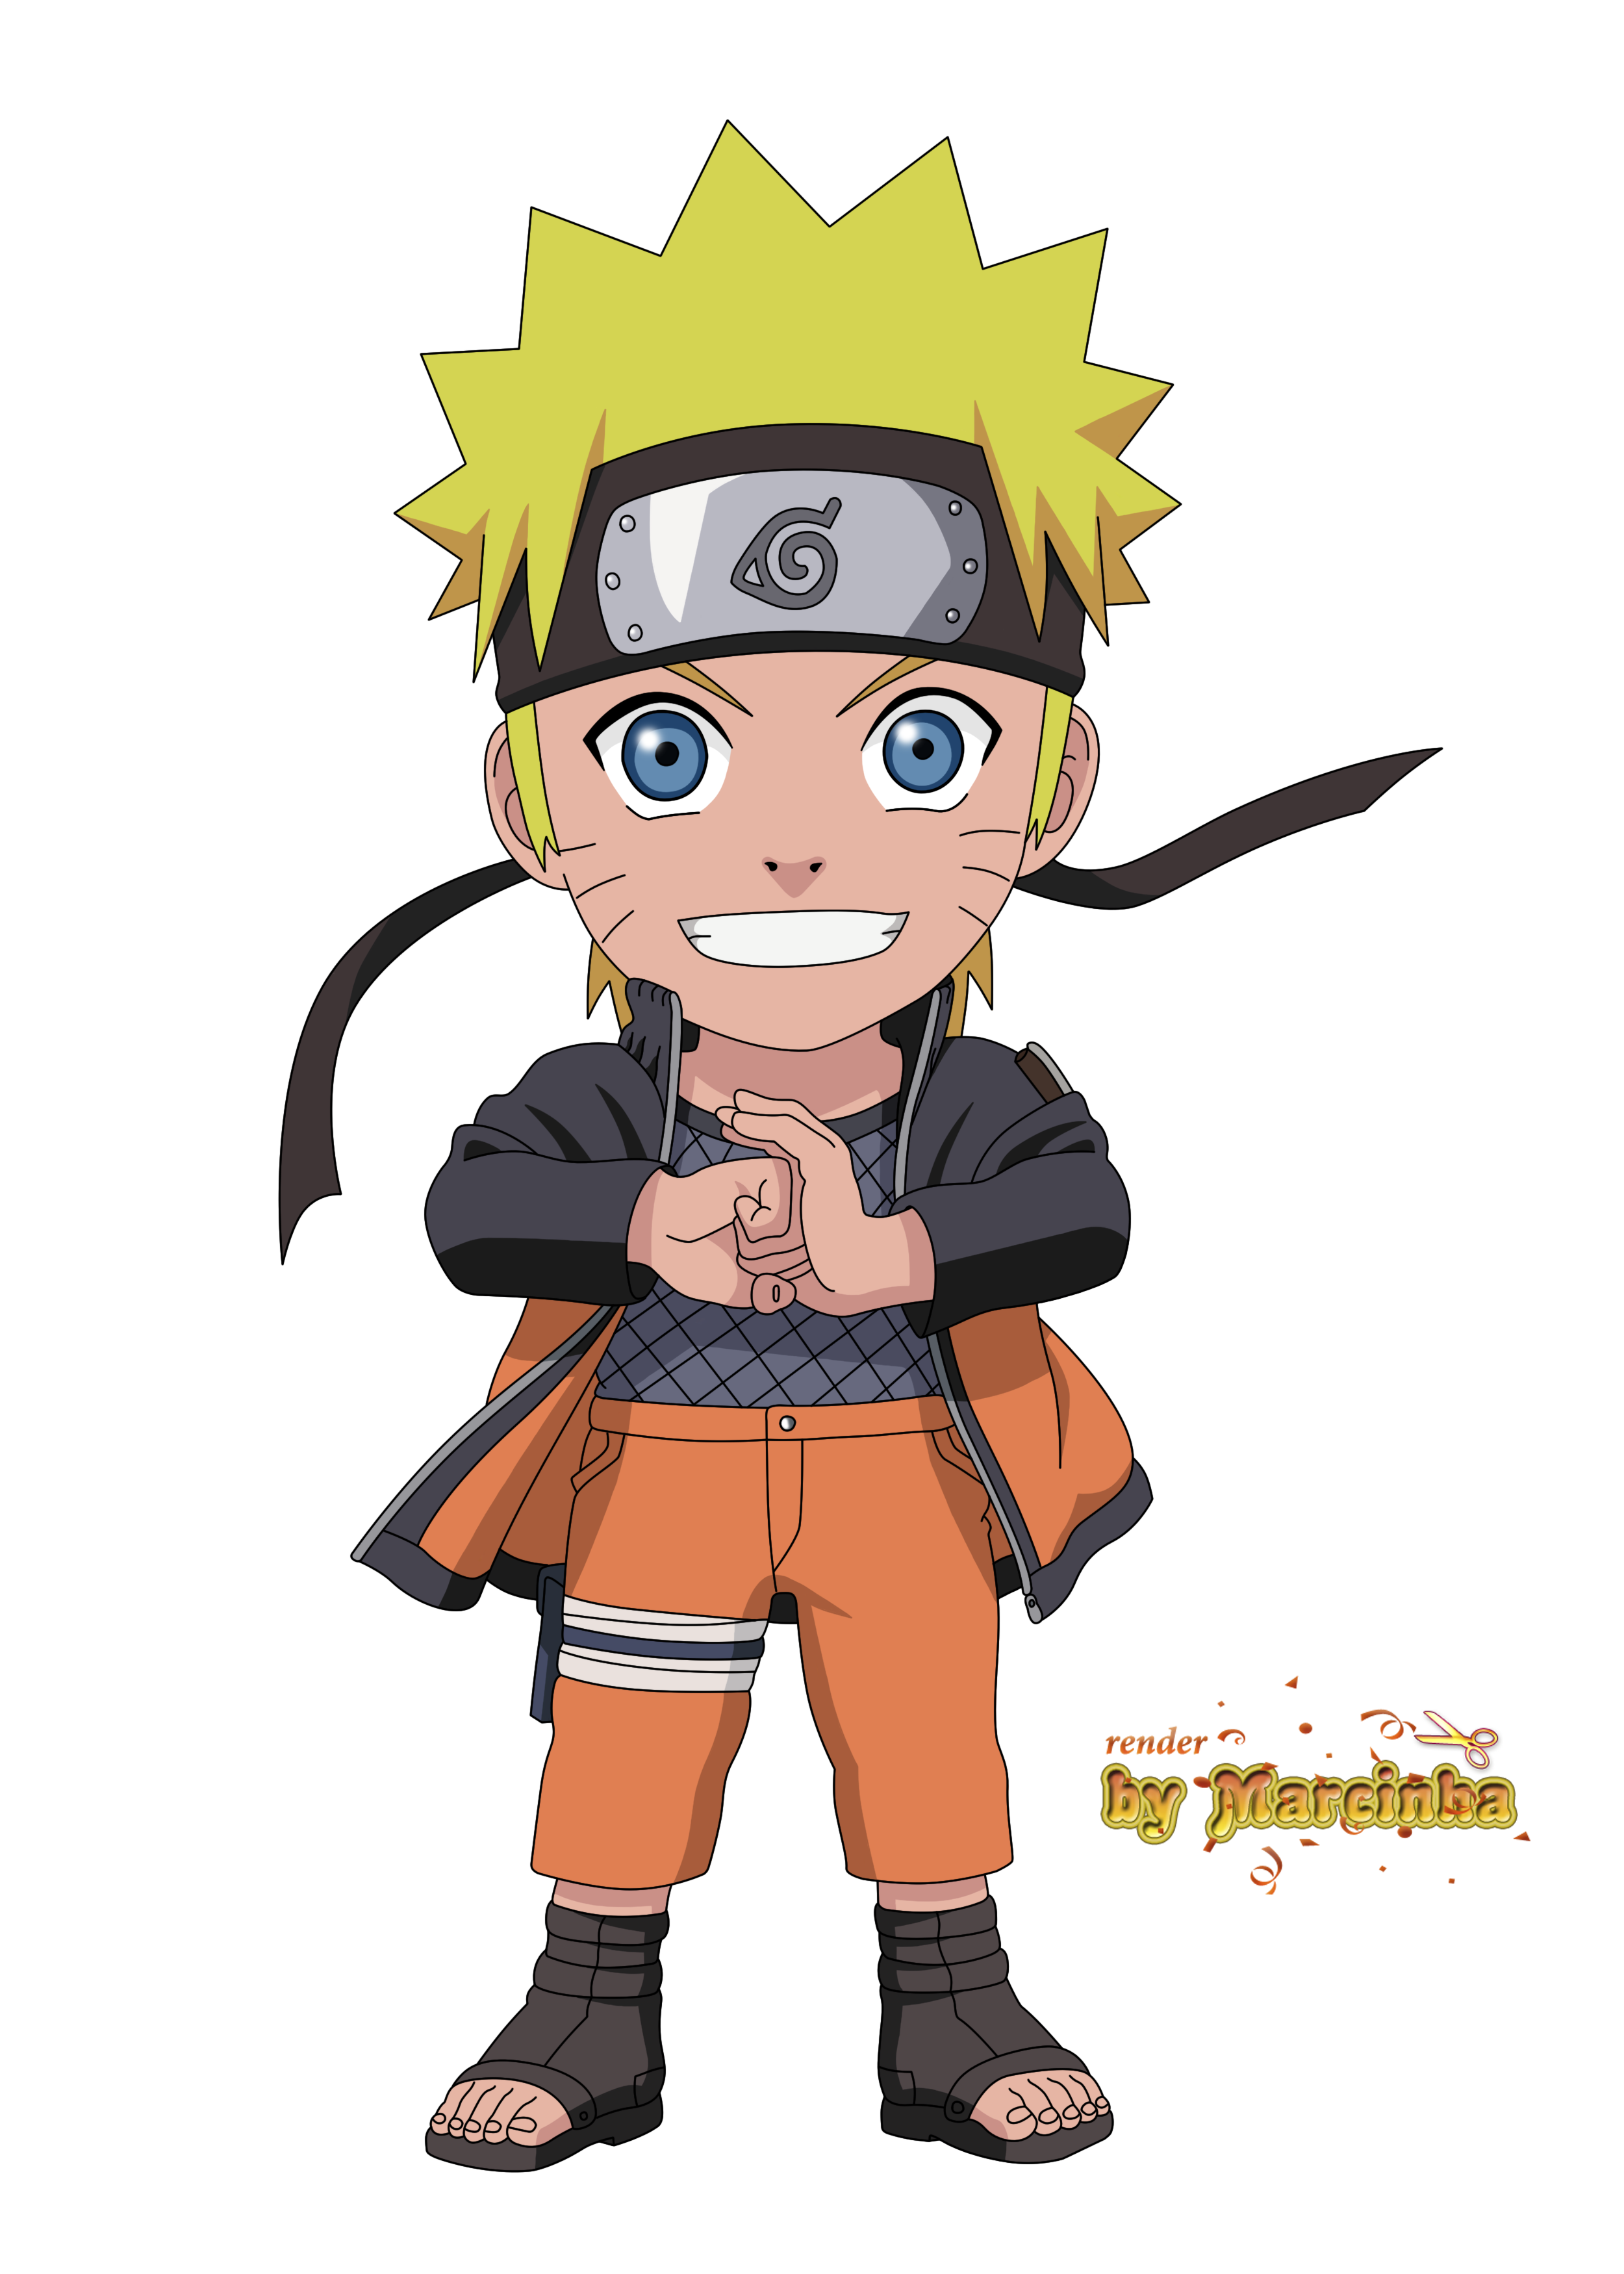 Naruto Shadow Clone Hd Png Download Is Free Transparent Png Image To Explore More Similar Hd Image On Pngitem Em 2020 Naruto Png Festa Naruto Naruto